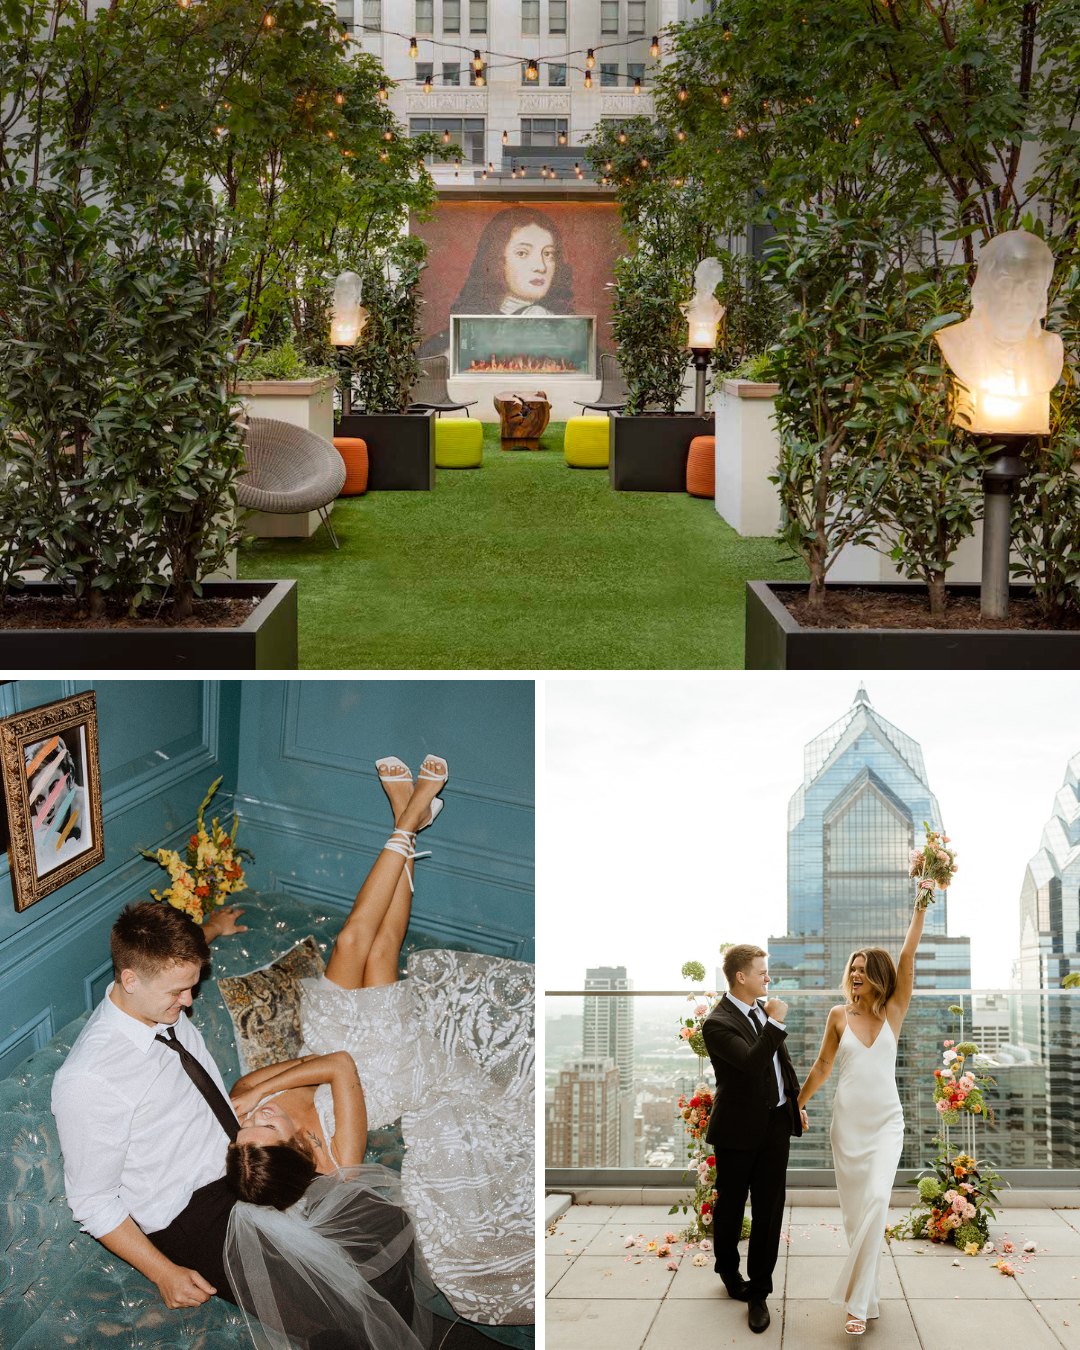 courtyard with quaint lights and Victorian tile art, couple snuggle on velvet blue couch, bride and groom celebrate overlooking Philadelphia 